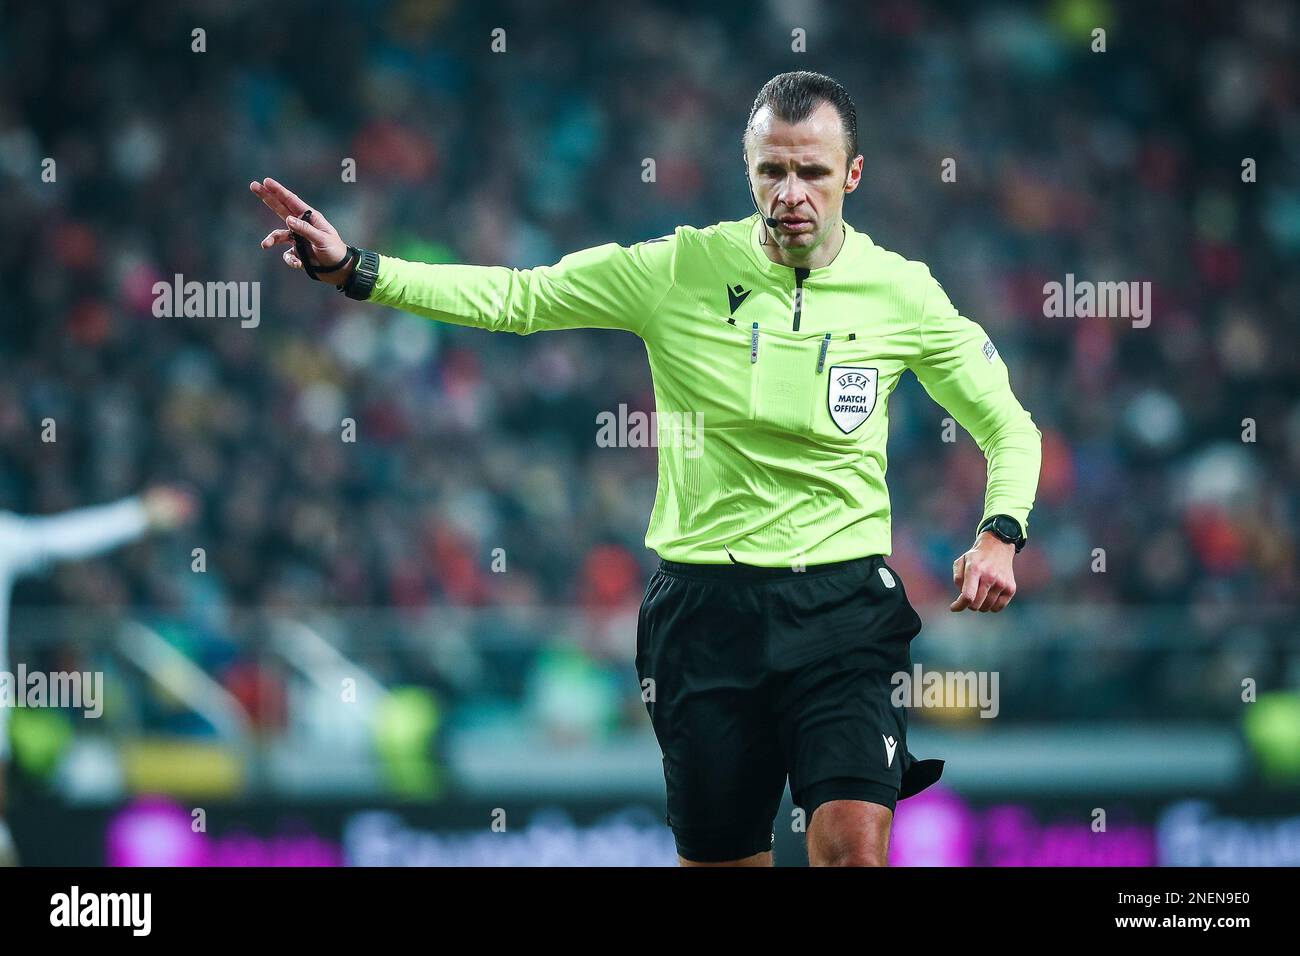 Warsaw, Poland. 16th Feb, 2023. sedzia Irfan Peljto during UEFA Europa League match between Shakhtar Donetsk and Stade Rennes FC on February 16, 2023 in Warsaw, Poland. (Photo by PressFocus/Sipa USA) Credit: Sipa USA/Alamy Live News Stock Photo